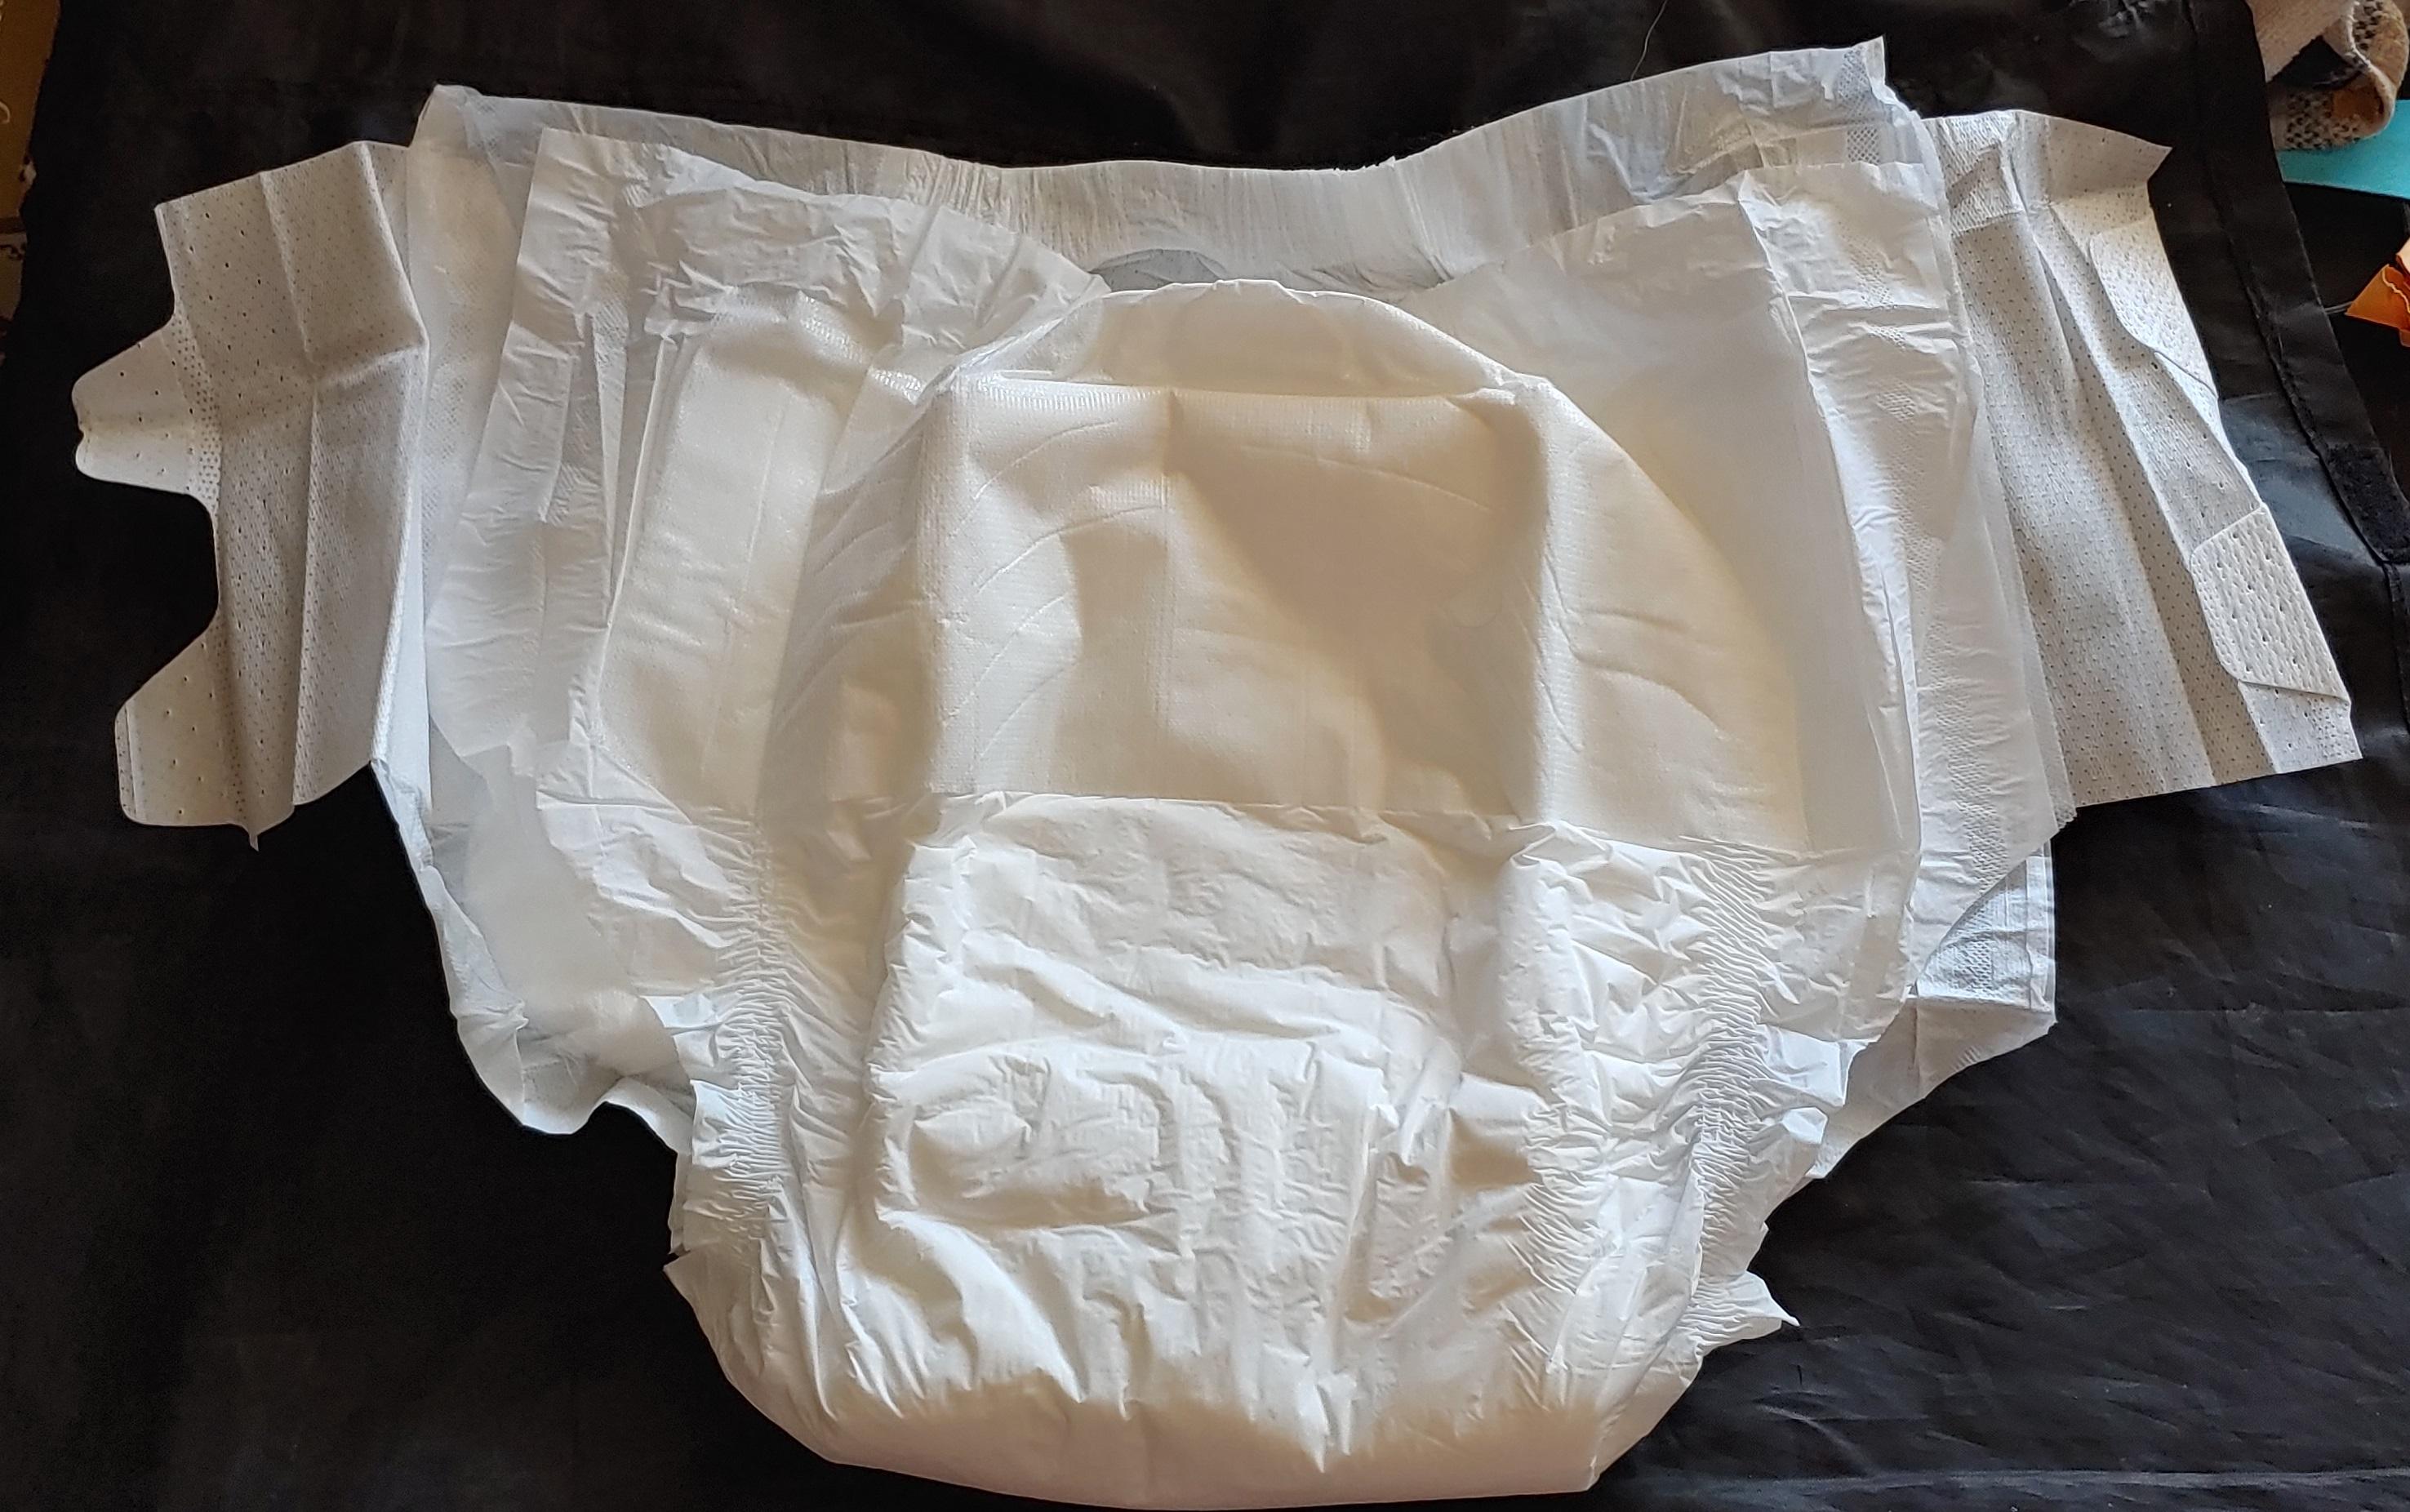 Bambino Bianco Ultra Stretch  ABDL Market, Find and compare ABDL diapers  lol